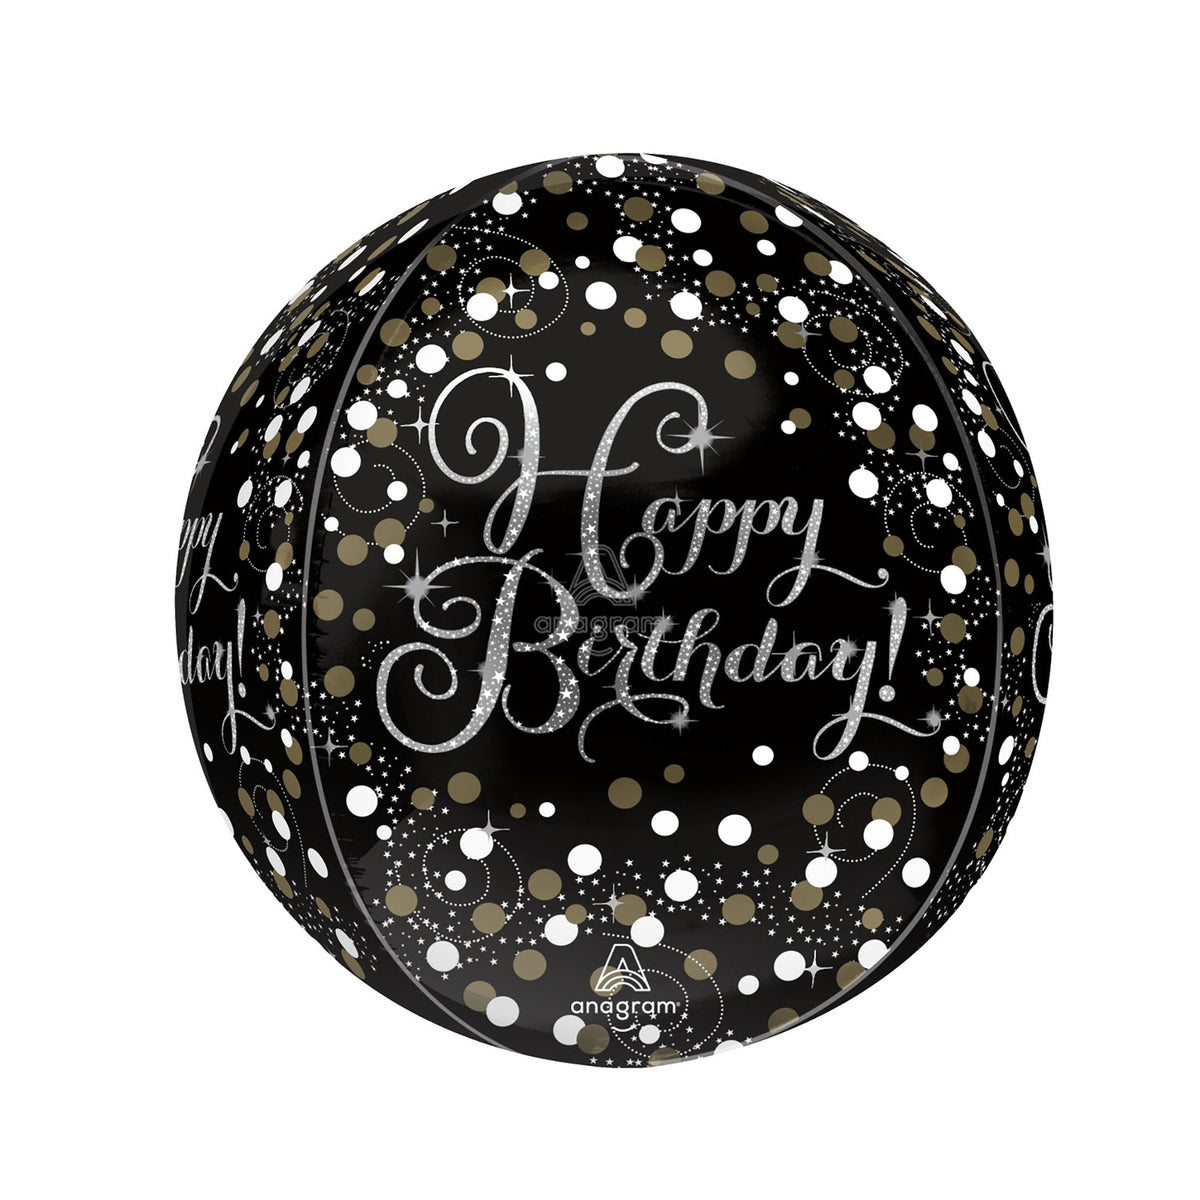 LE GROUPE BLC INTL INC Balloons "Happy Birthday!" Sparkling Birthday Orbz Balloon, 15 Inches, 1 Count